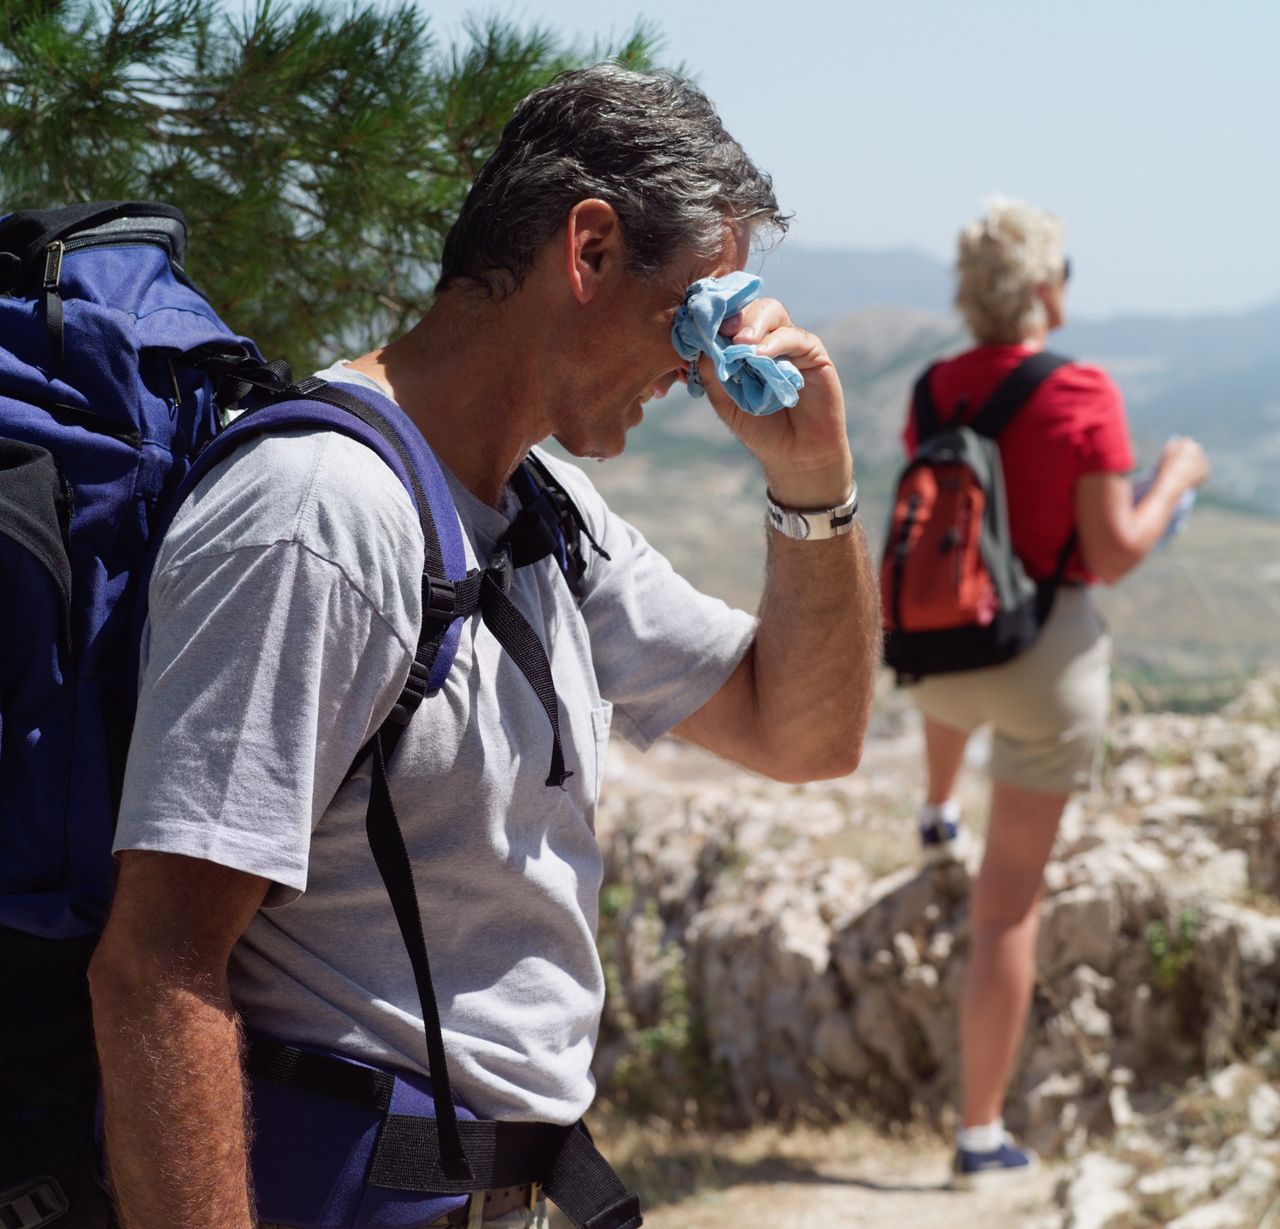 Tourists head out onto the trails, unaware that the heat in Greece is deadly.